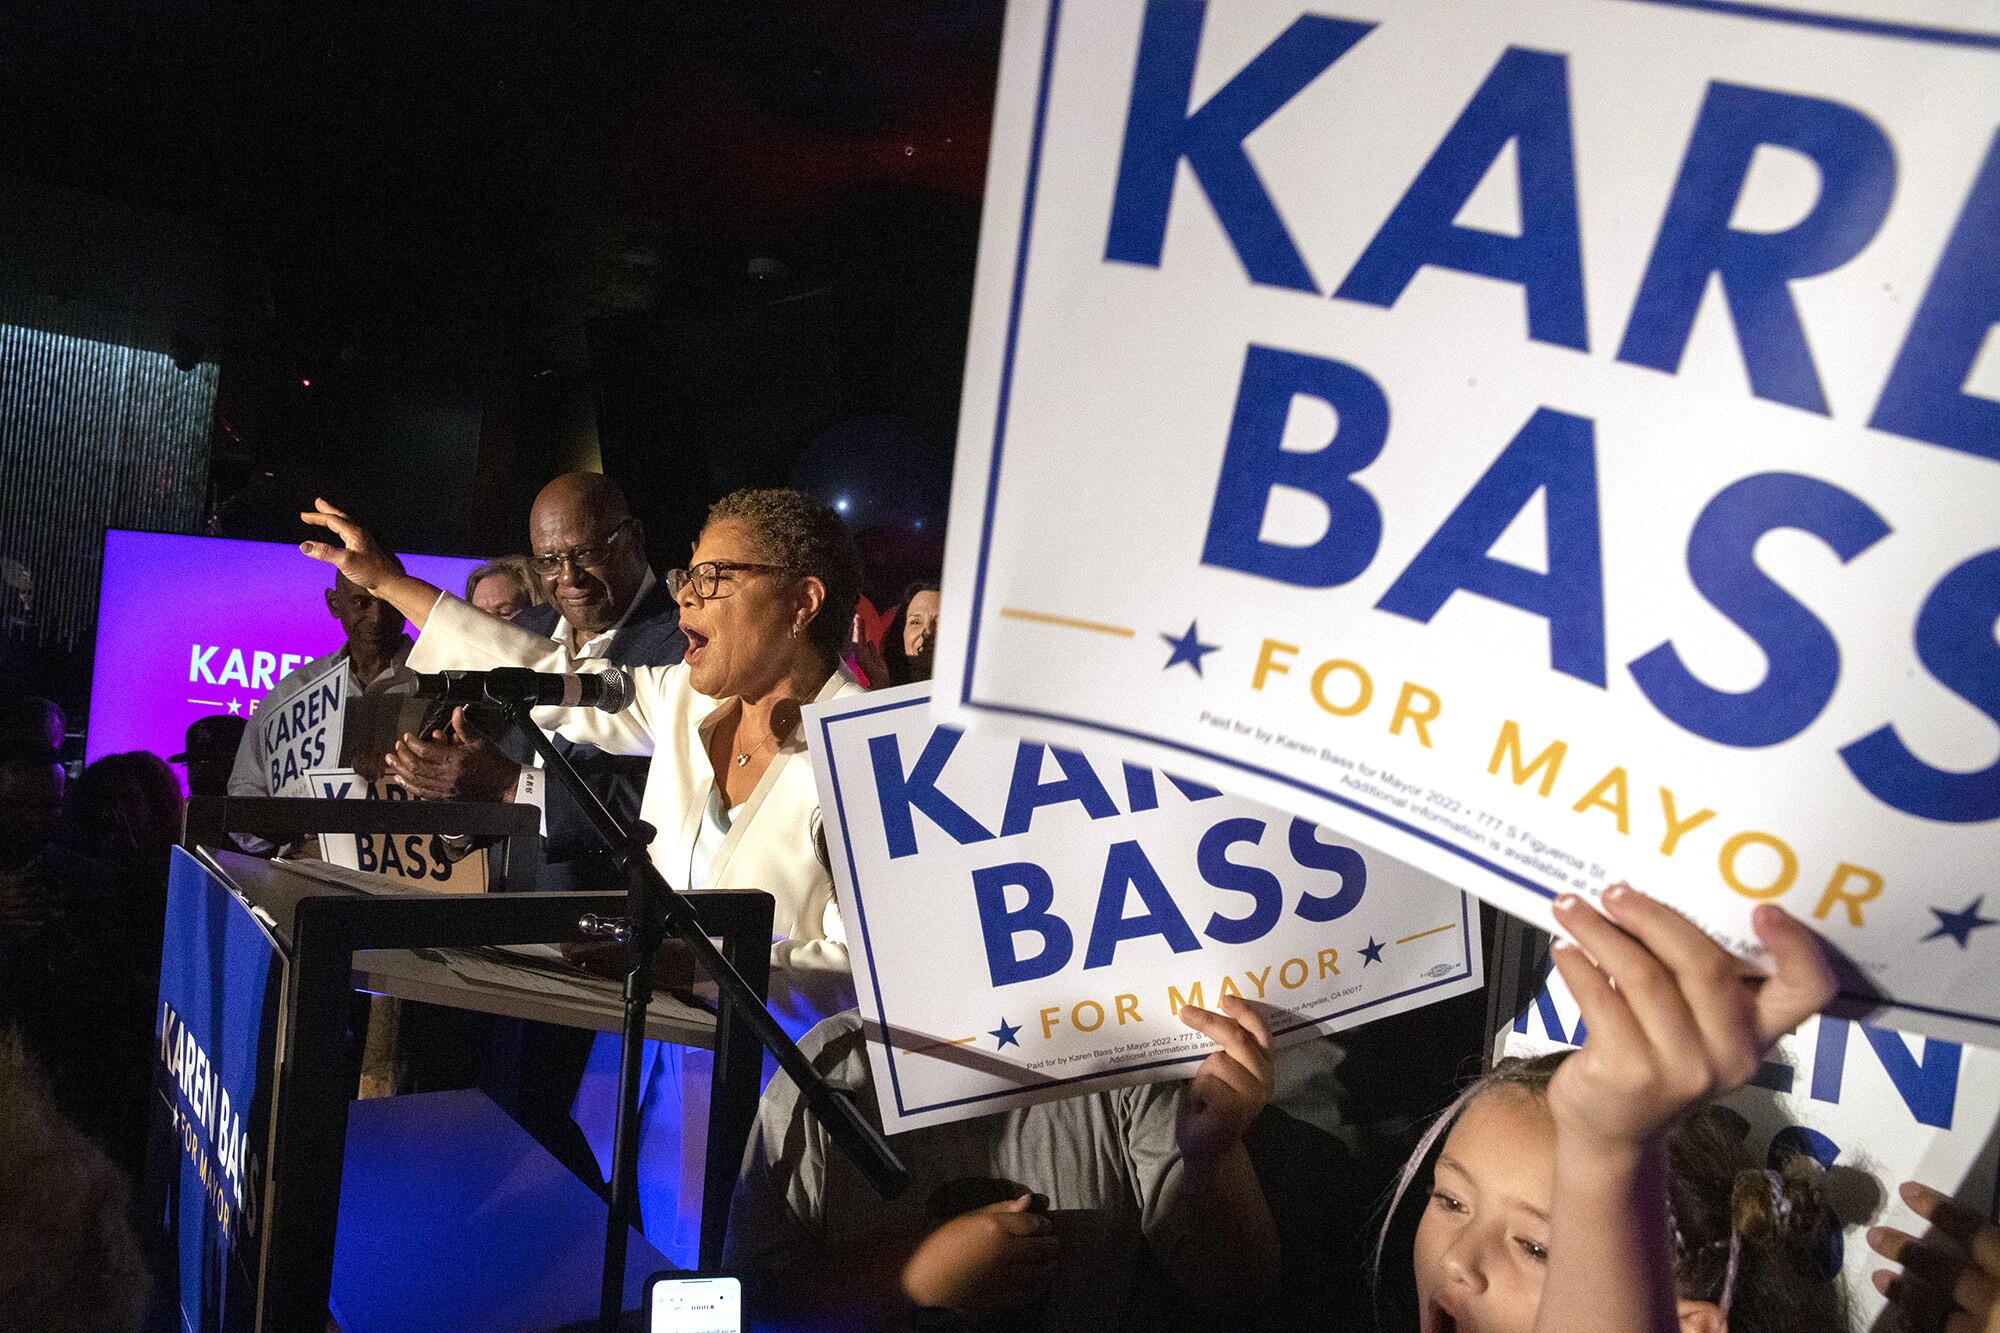 Karen Bass gesturing as she speaks at an election event, surrounded by supporters